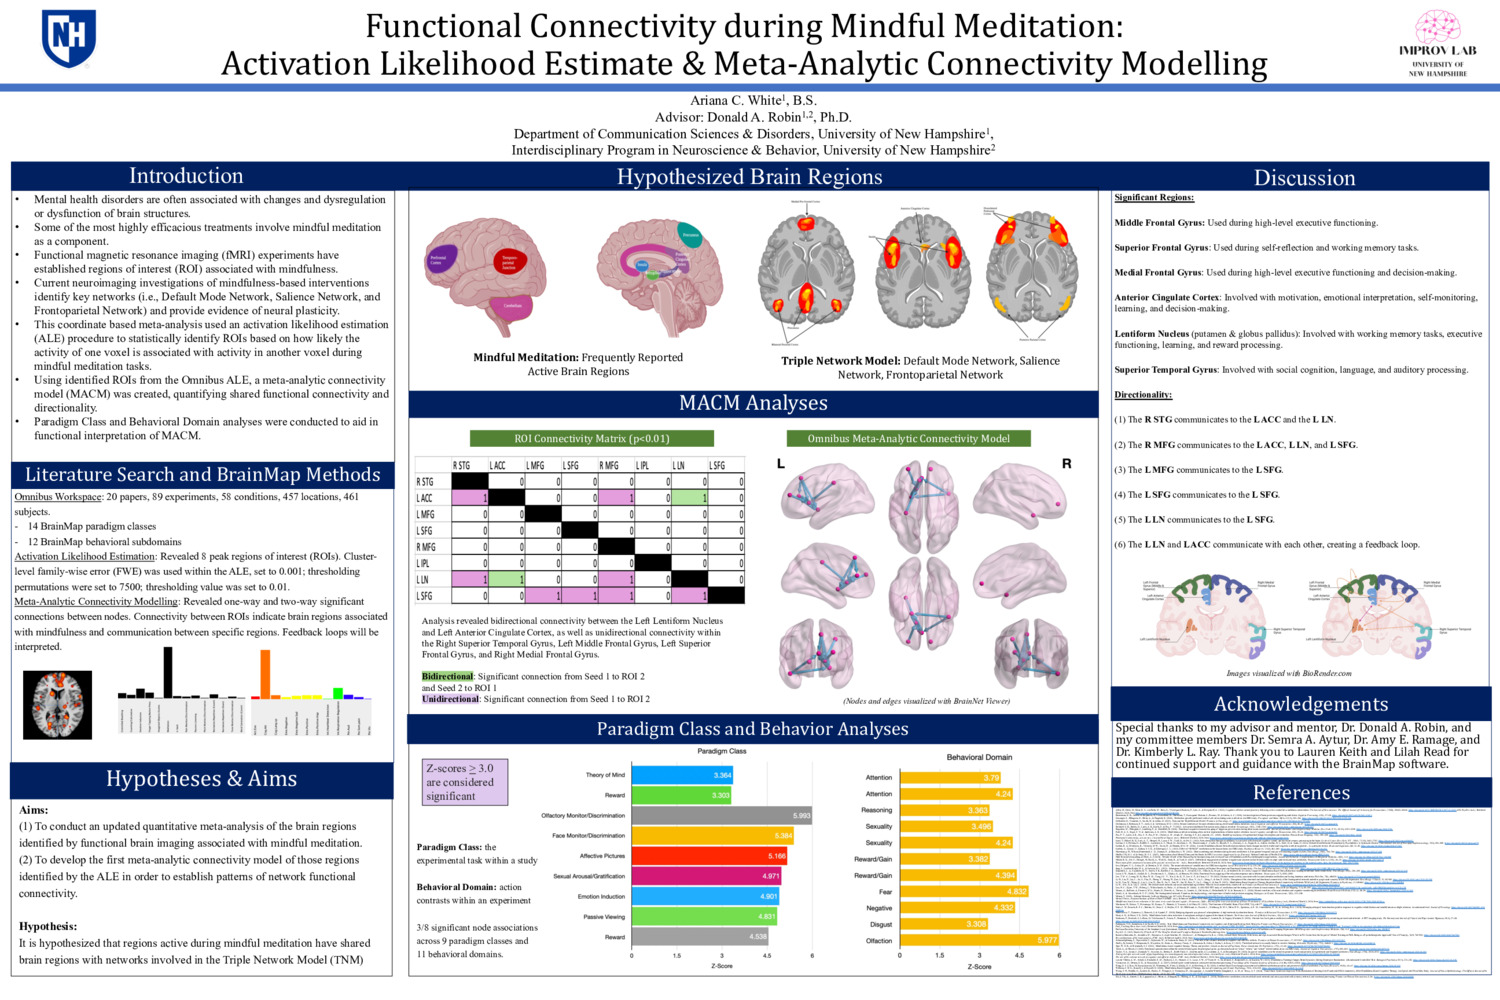 Functional Connectivity During Mindful Meditation: Activation Likelihood Estimate & Meta-Analytic Connectivity Modelling by arianawhite